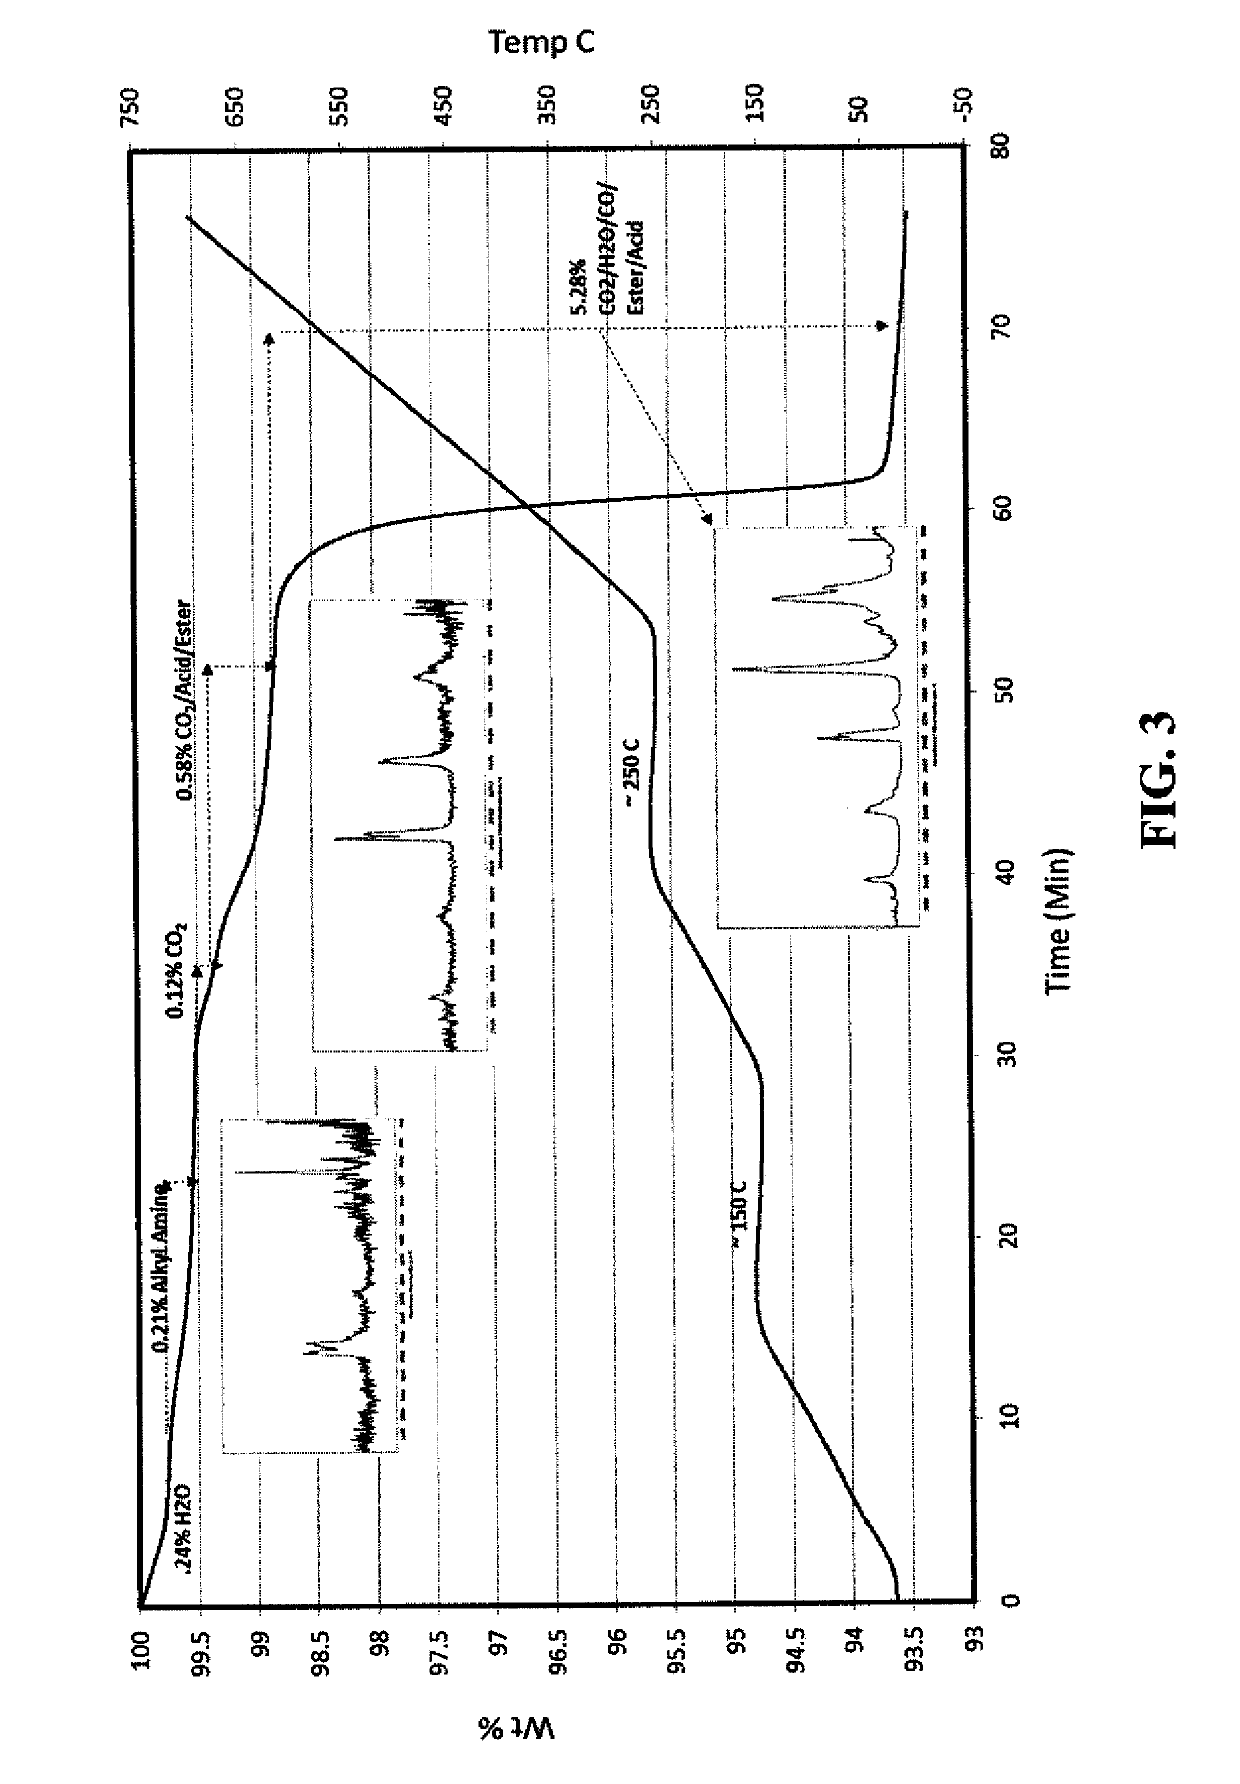 Method of making silver-containing dispersions with nitrogenous bases